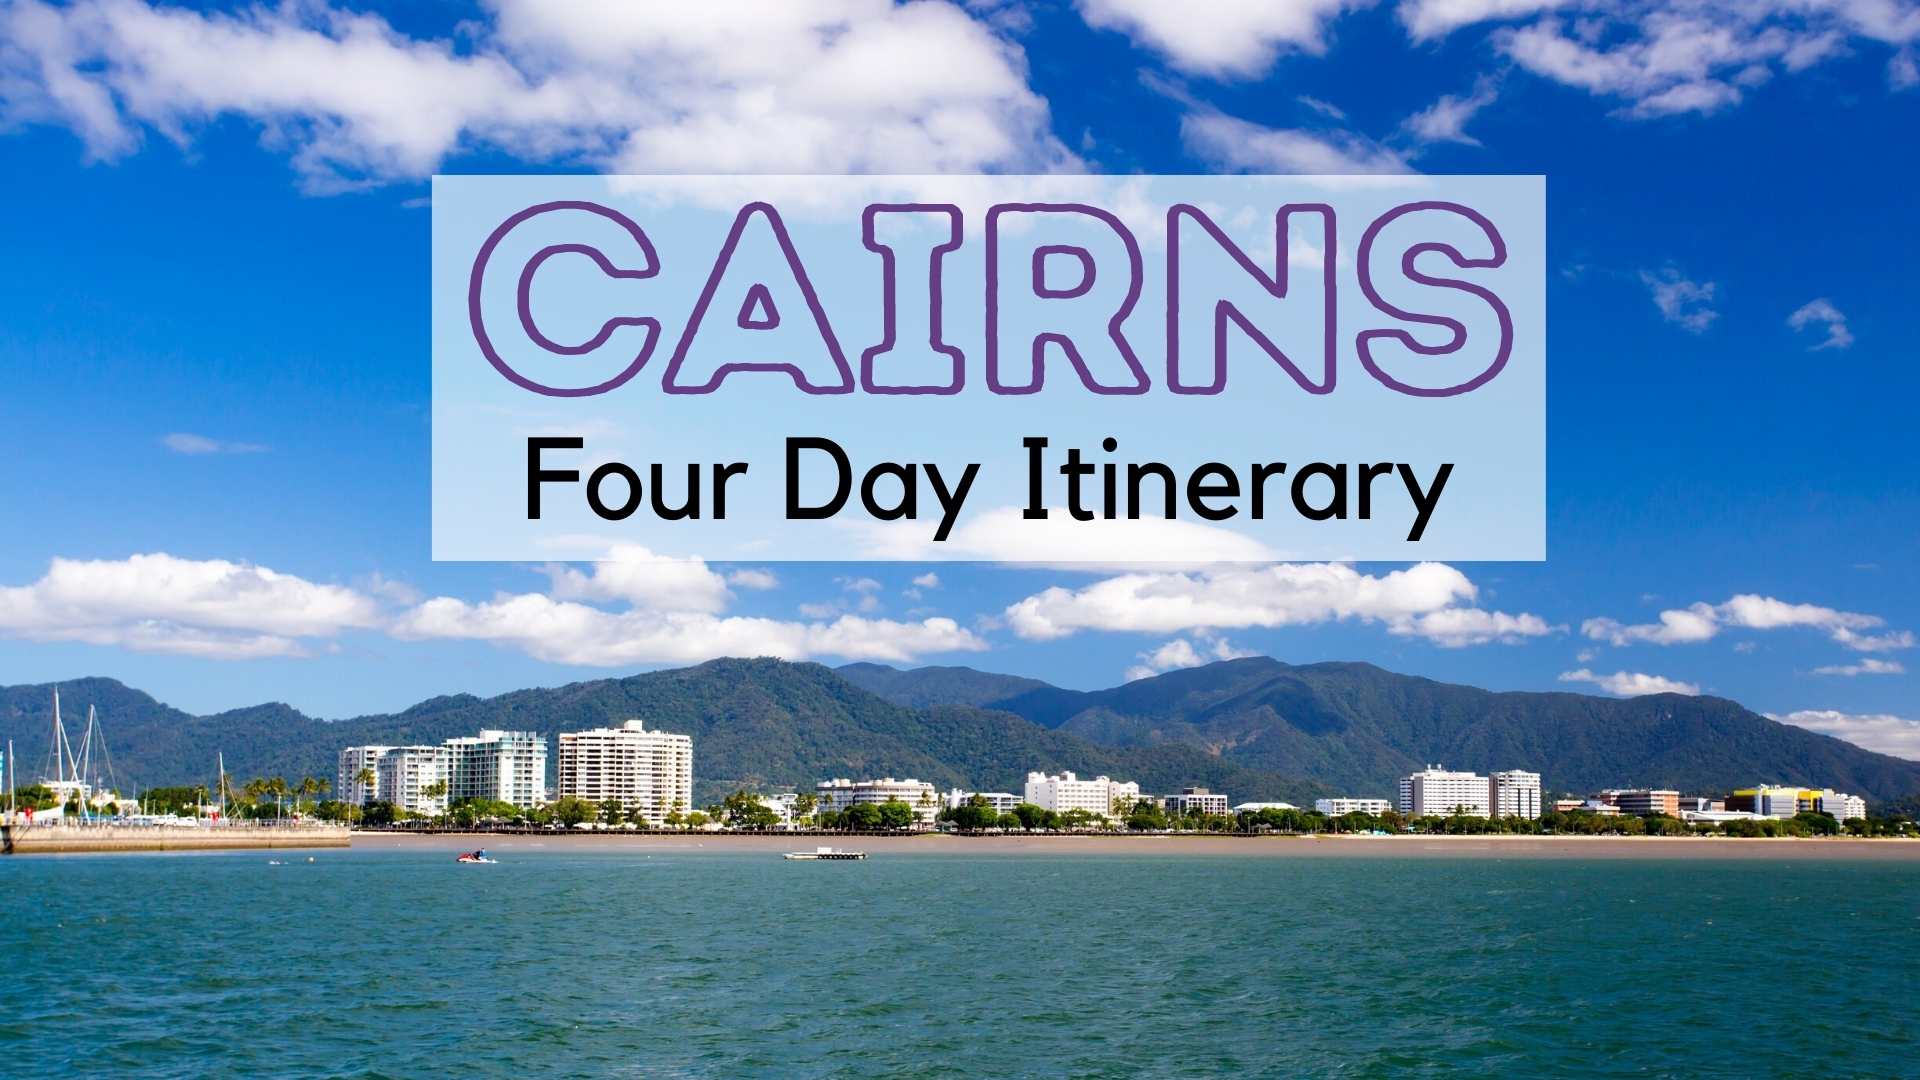 Cairns Four Day Itinerary